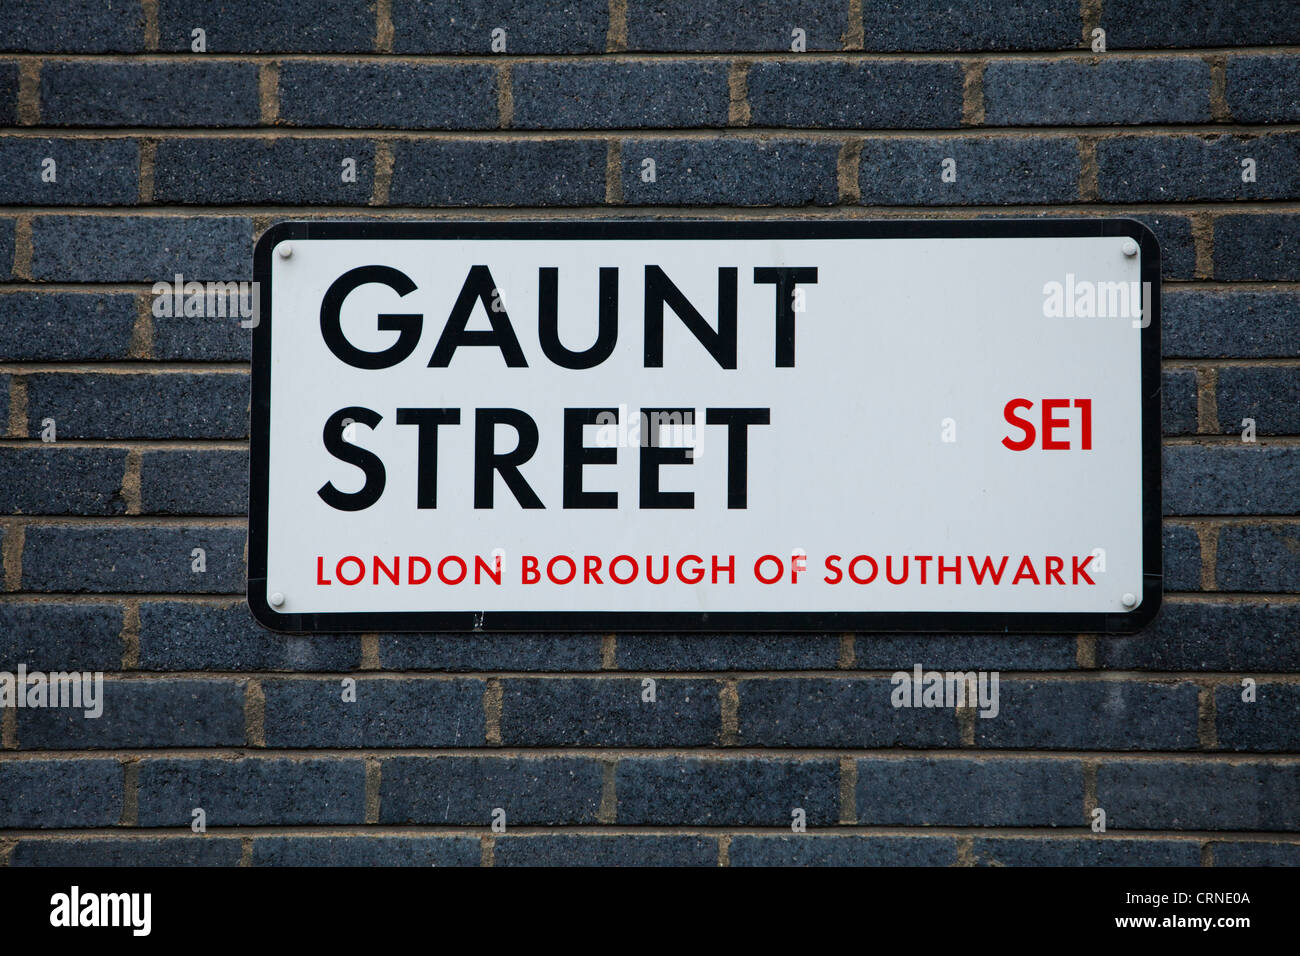 Gaunt Street SE1 road sign in the London Borough of Southwark. Stock Photo